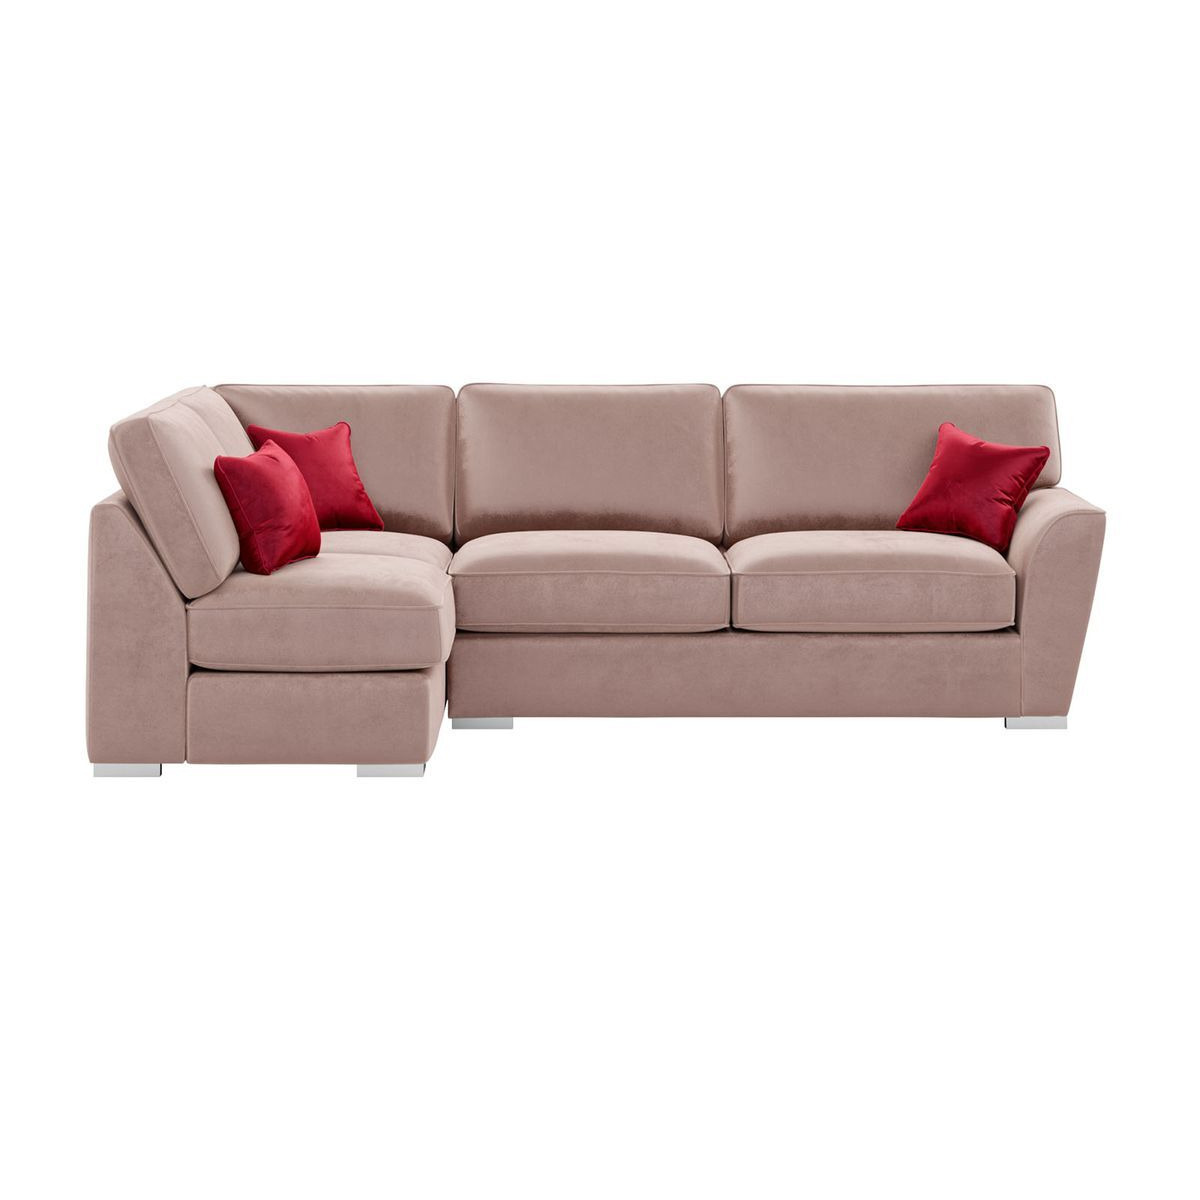 Majestic New Left Hand Corner Sofa with Fitted Back Cushions, pink/dark red - image 1